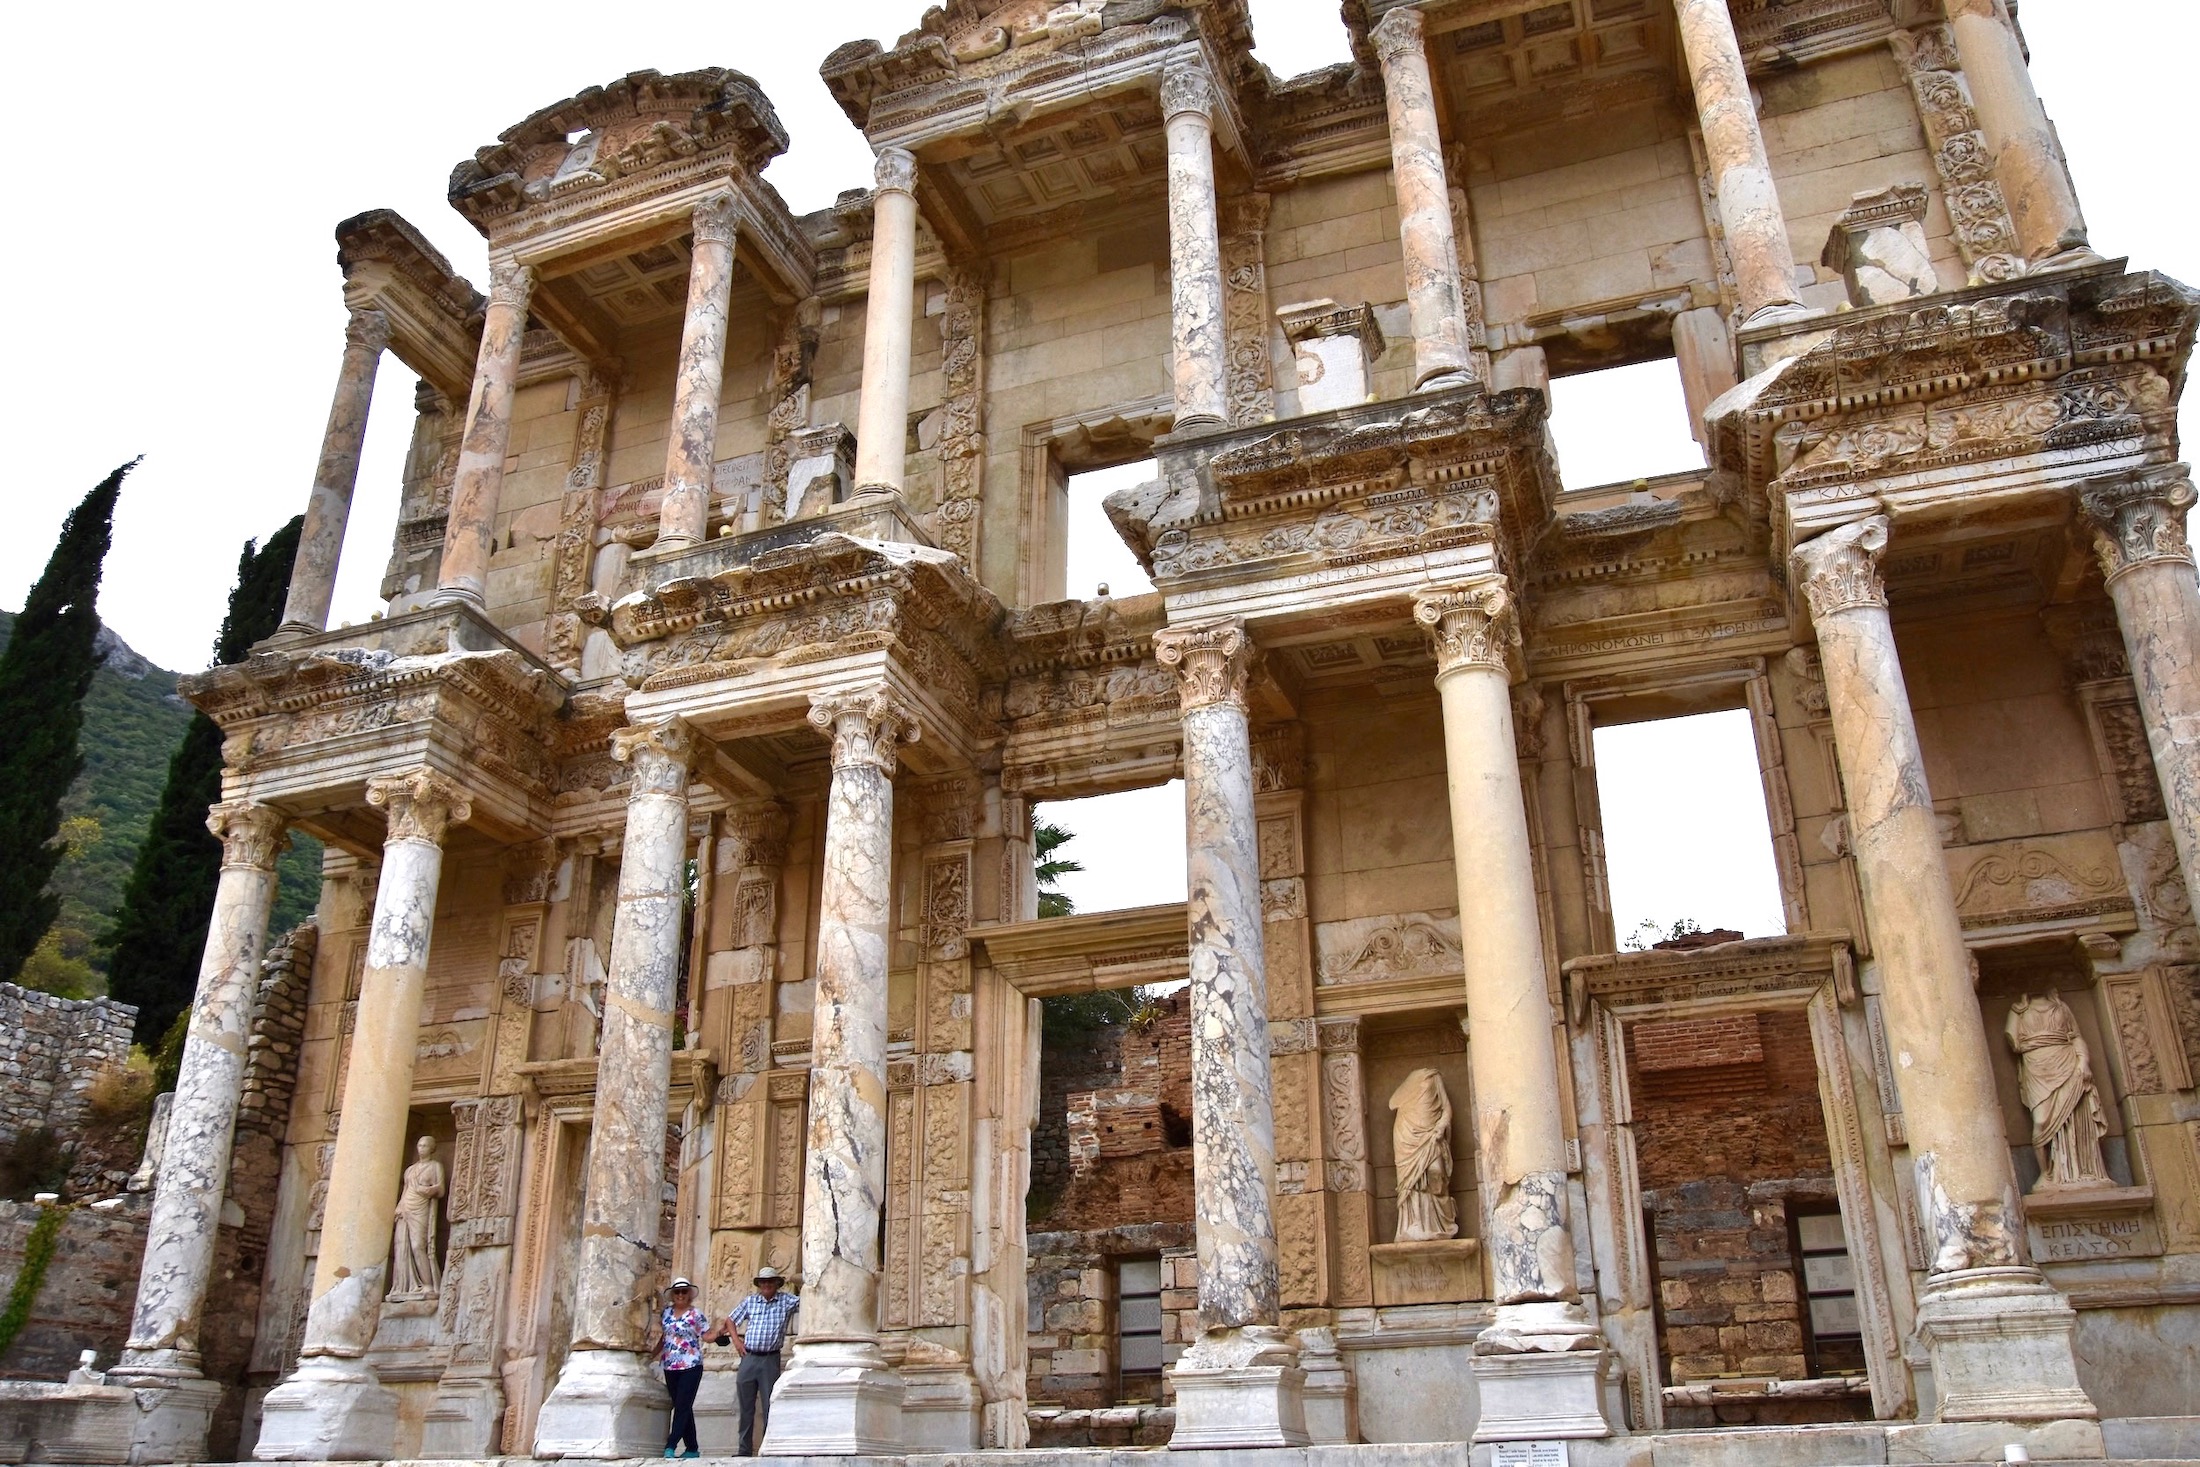 At the Library of Celsus, Ephesus, Turkey